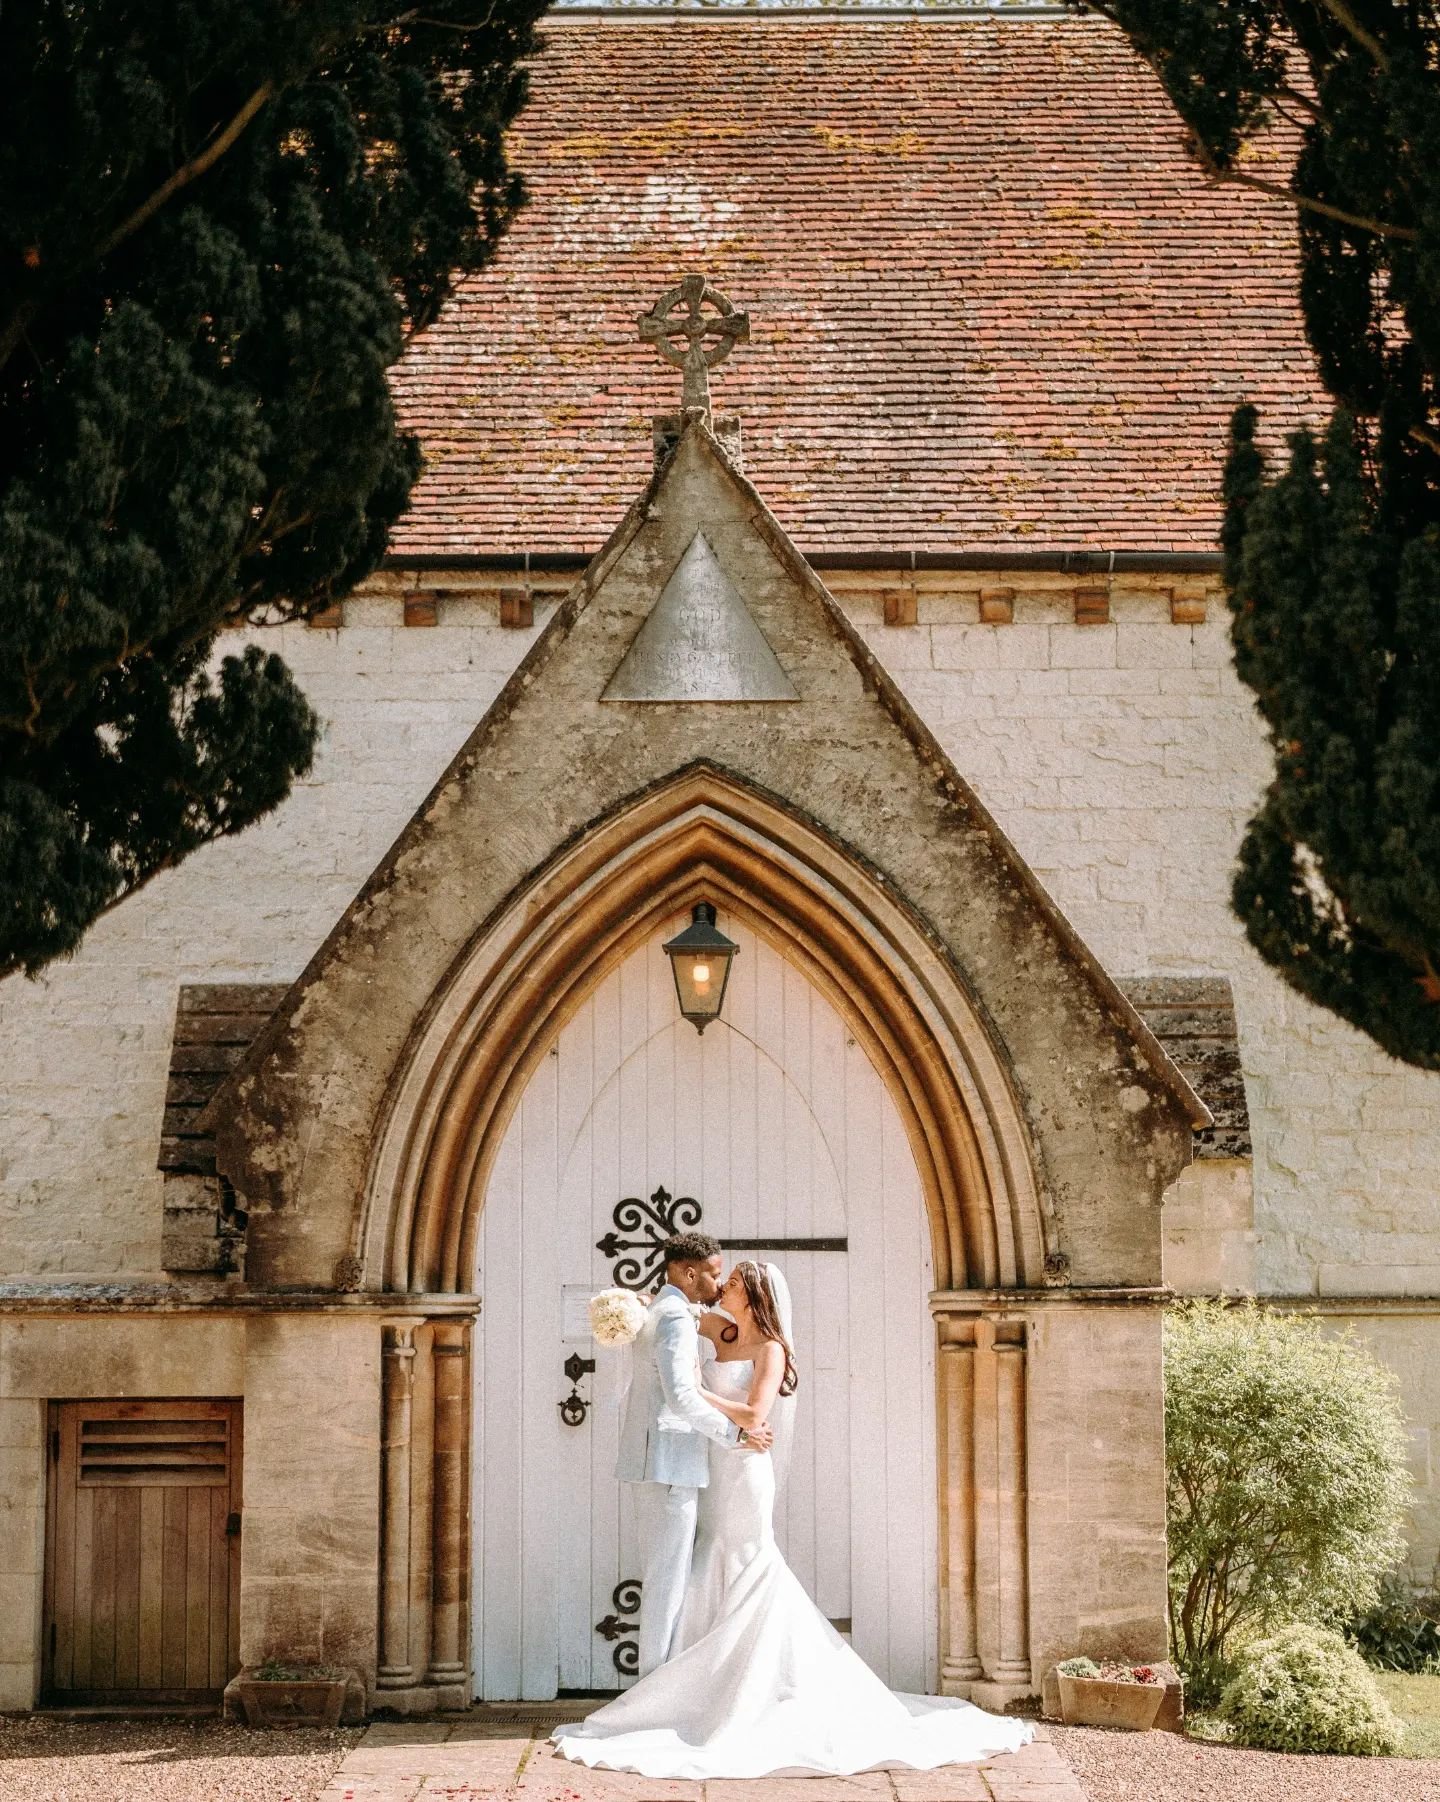 ✨ S &amp; P ✨

Sophie and Phil's wedding was filled with so much intimacy and warmth that it was an absolute dream for any wedding photographer! The emotion was flowing throughout the day and the bond these two had was undeniable!

The weather was ou